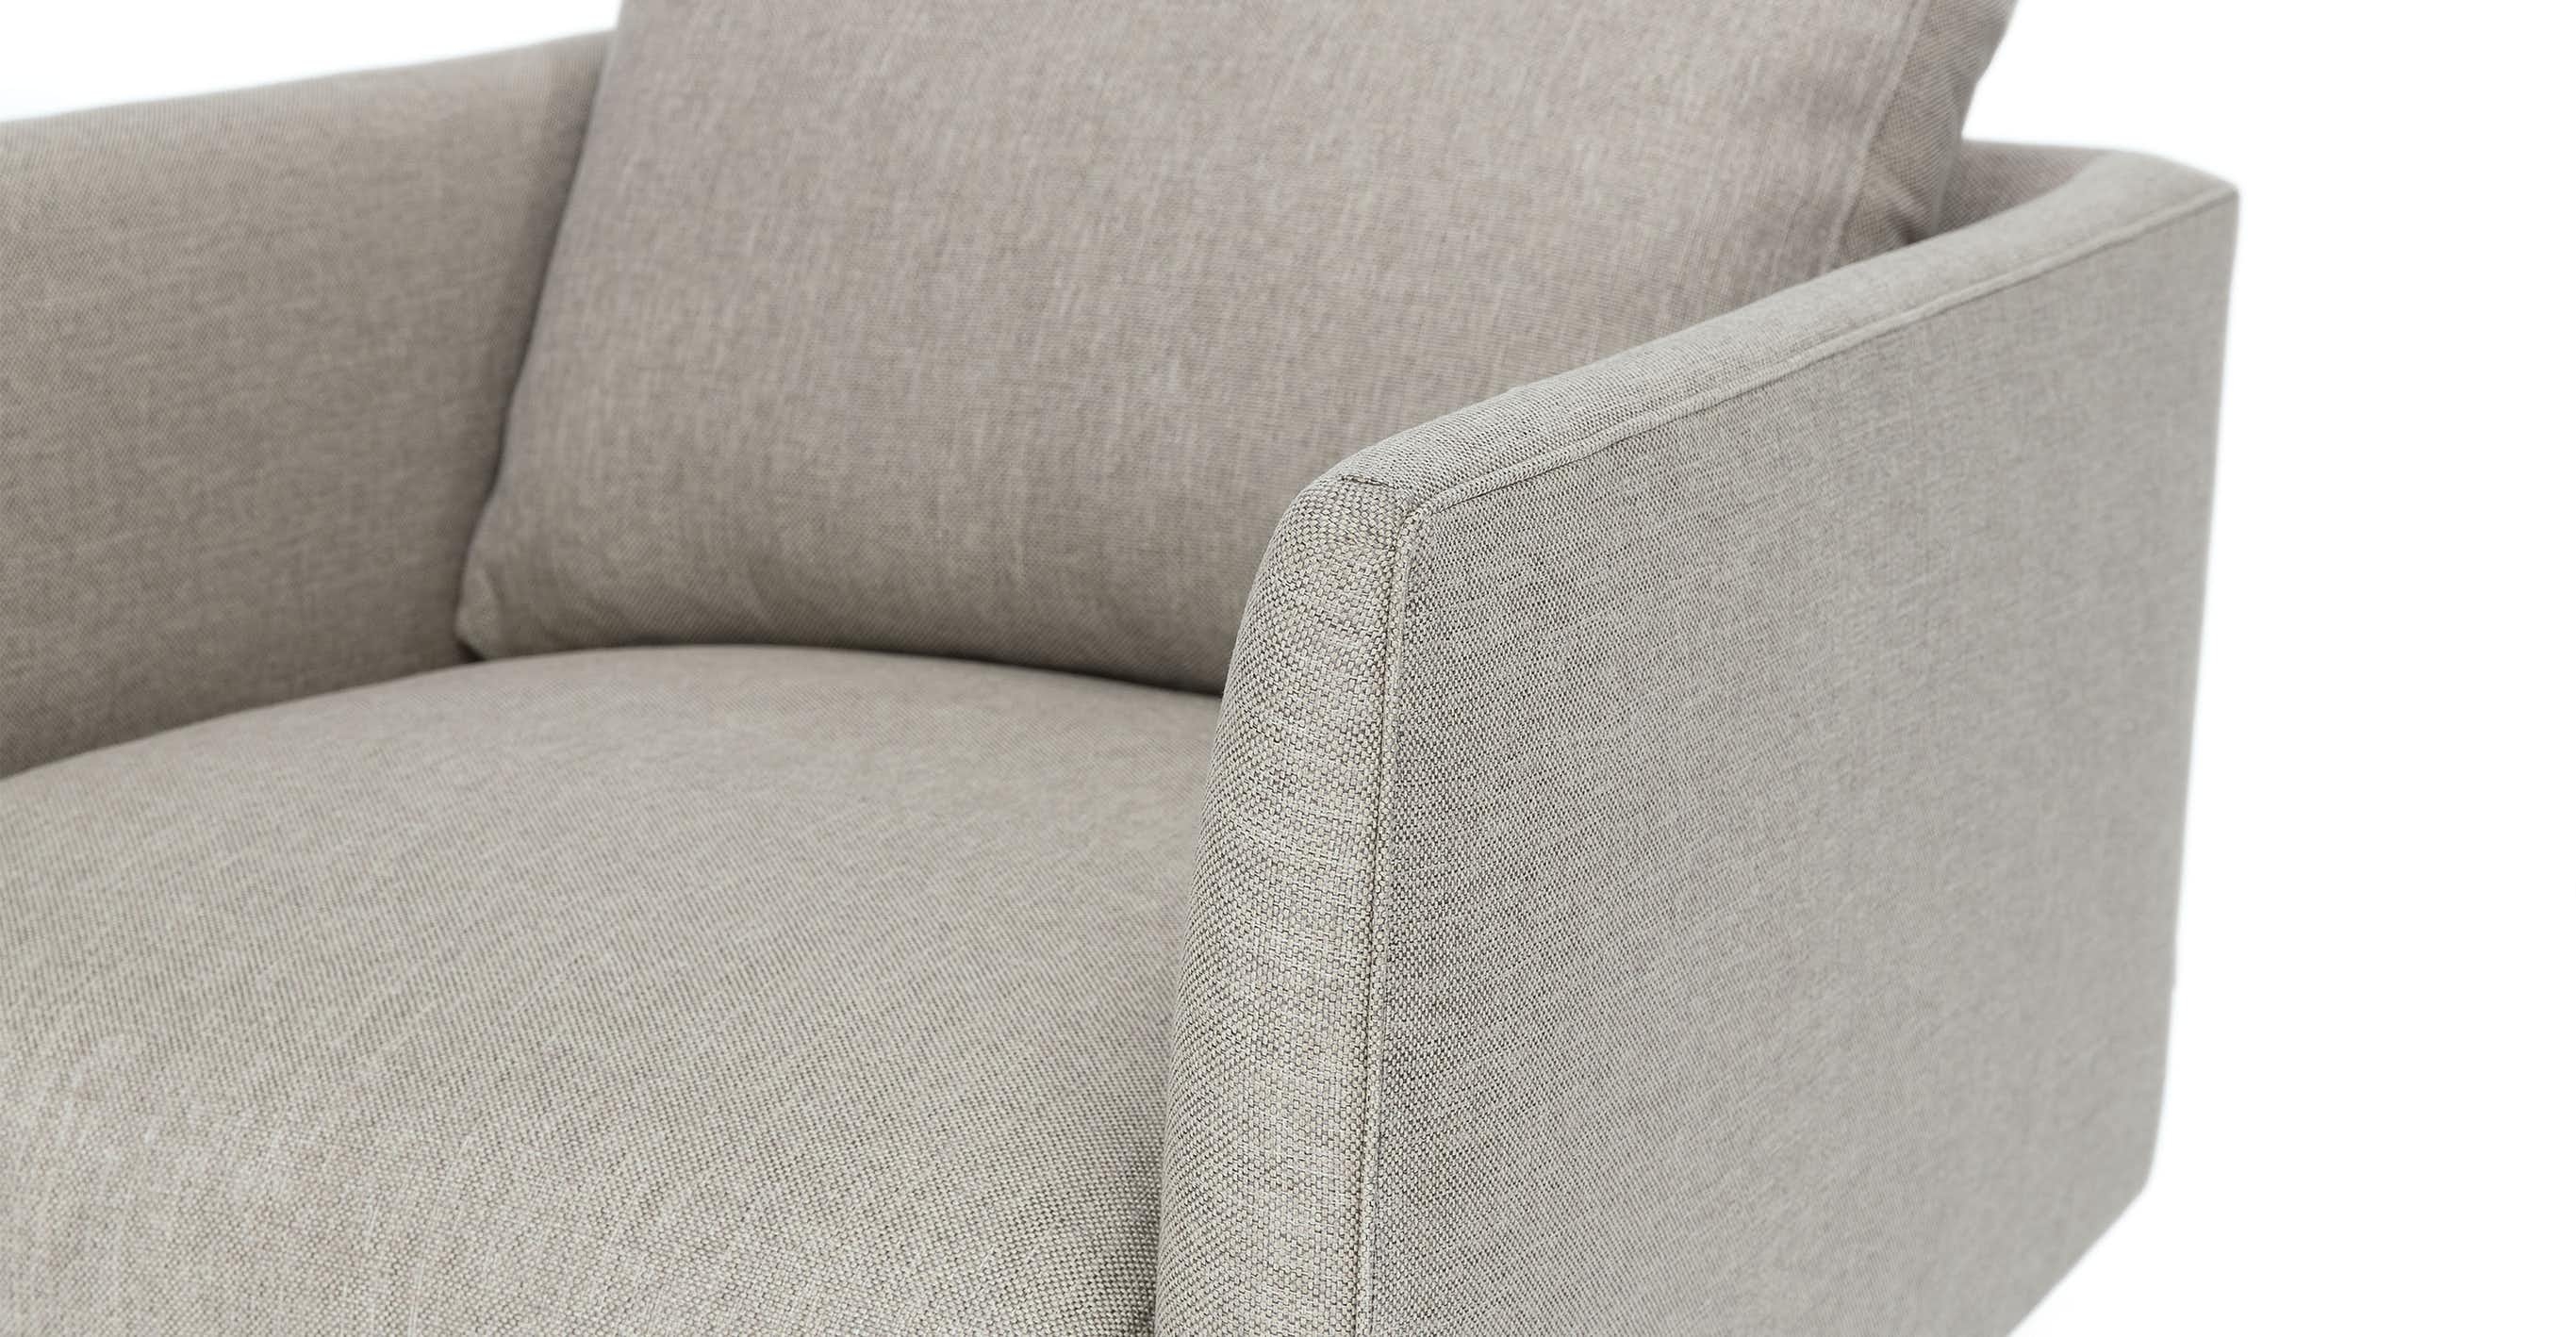 Burrard Accent Chair - Image 3